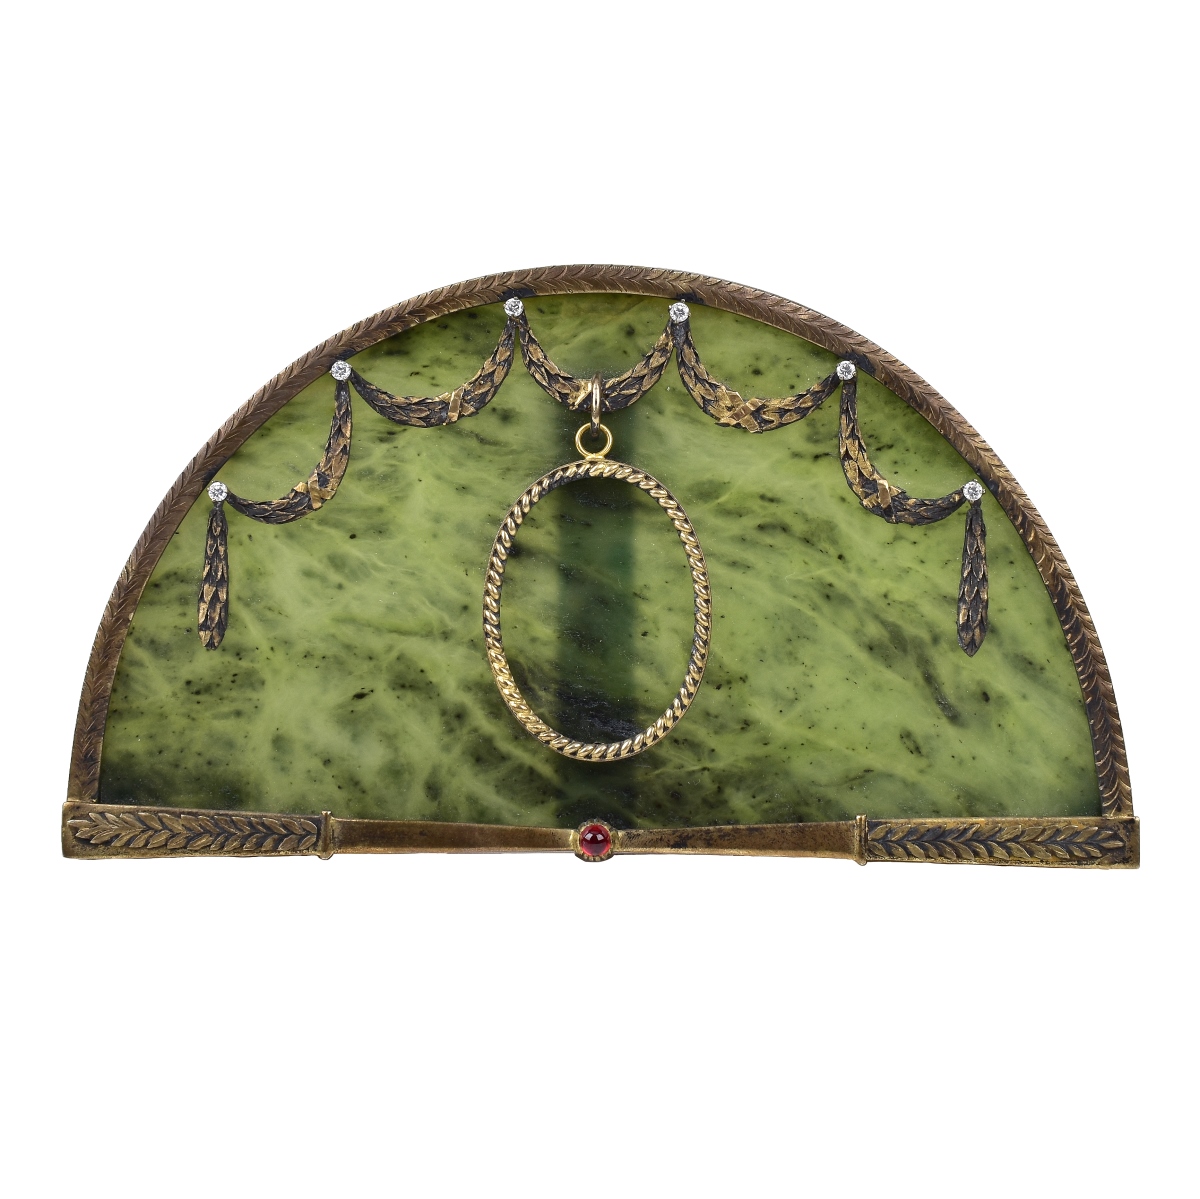 A European Silver and Jade Bejeweled Frame